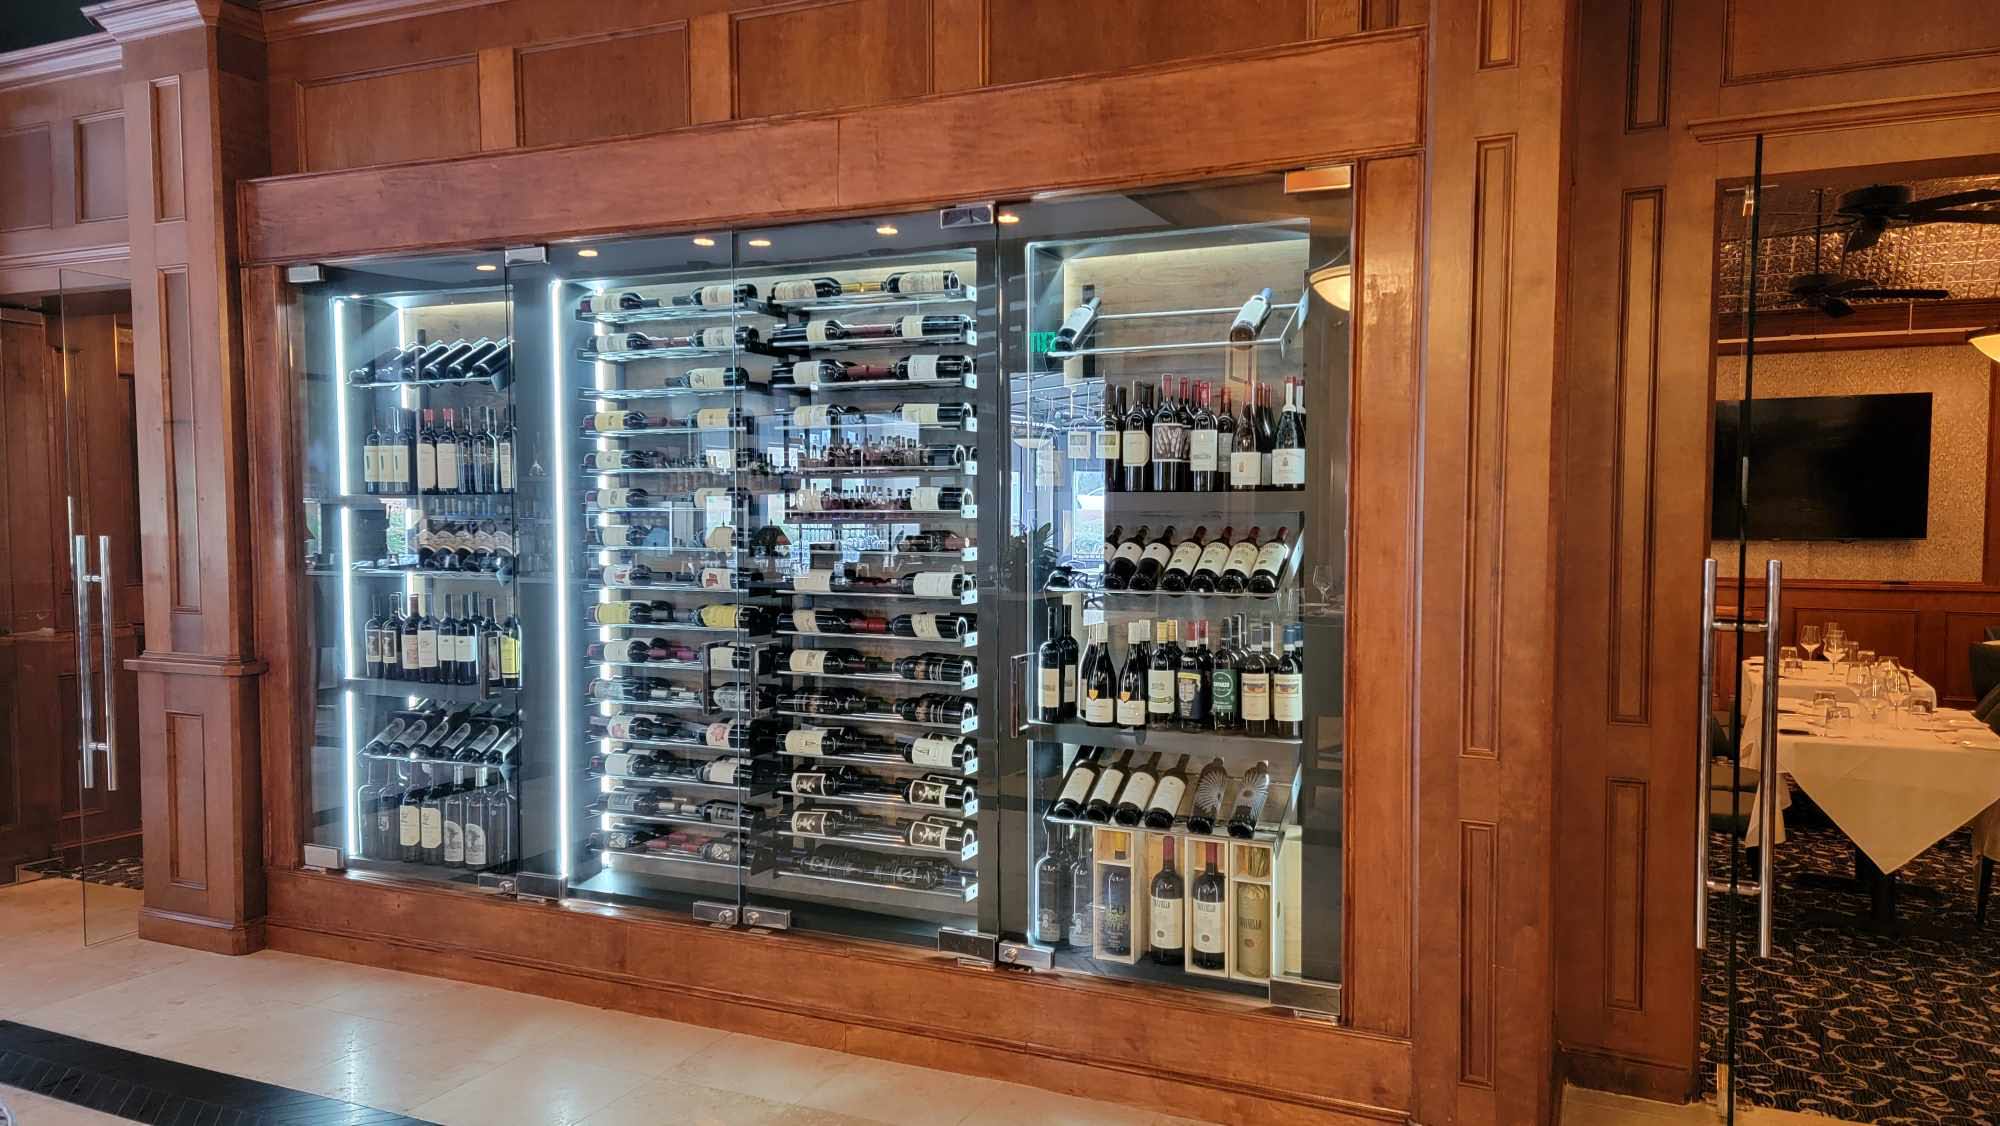 These wine doors for Luci's Kitchen in Alpharetta are a stunning feature to show off their wine selection for this new restaurant! 